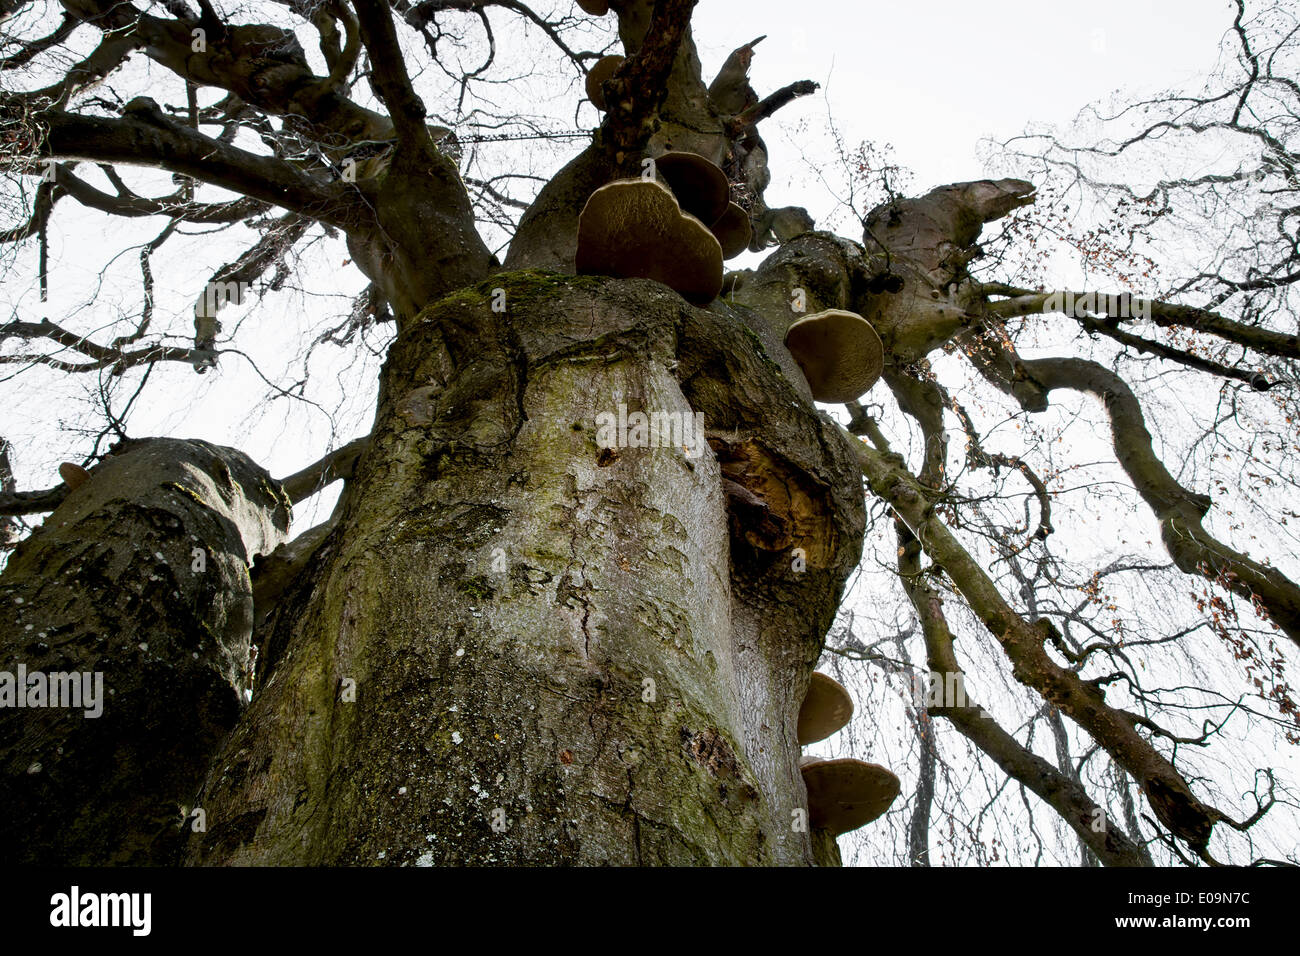 Massive old european beech (fagus sylvatica) in the park Buchlovice, Czech republic. View from the bottom up. Stock Photo